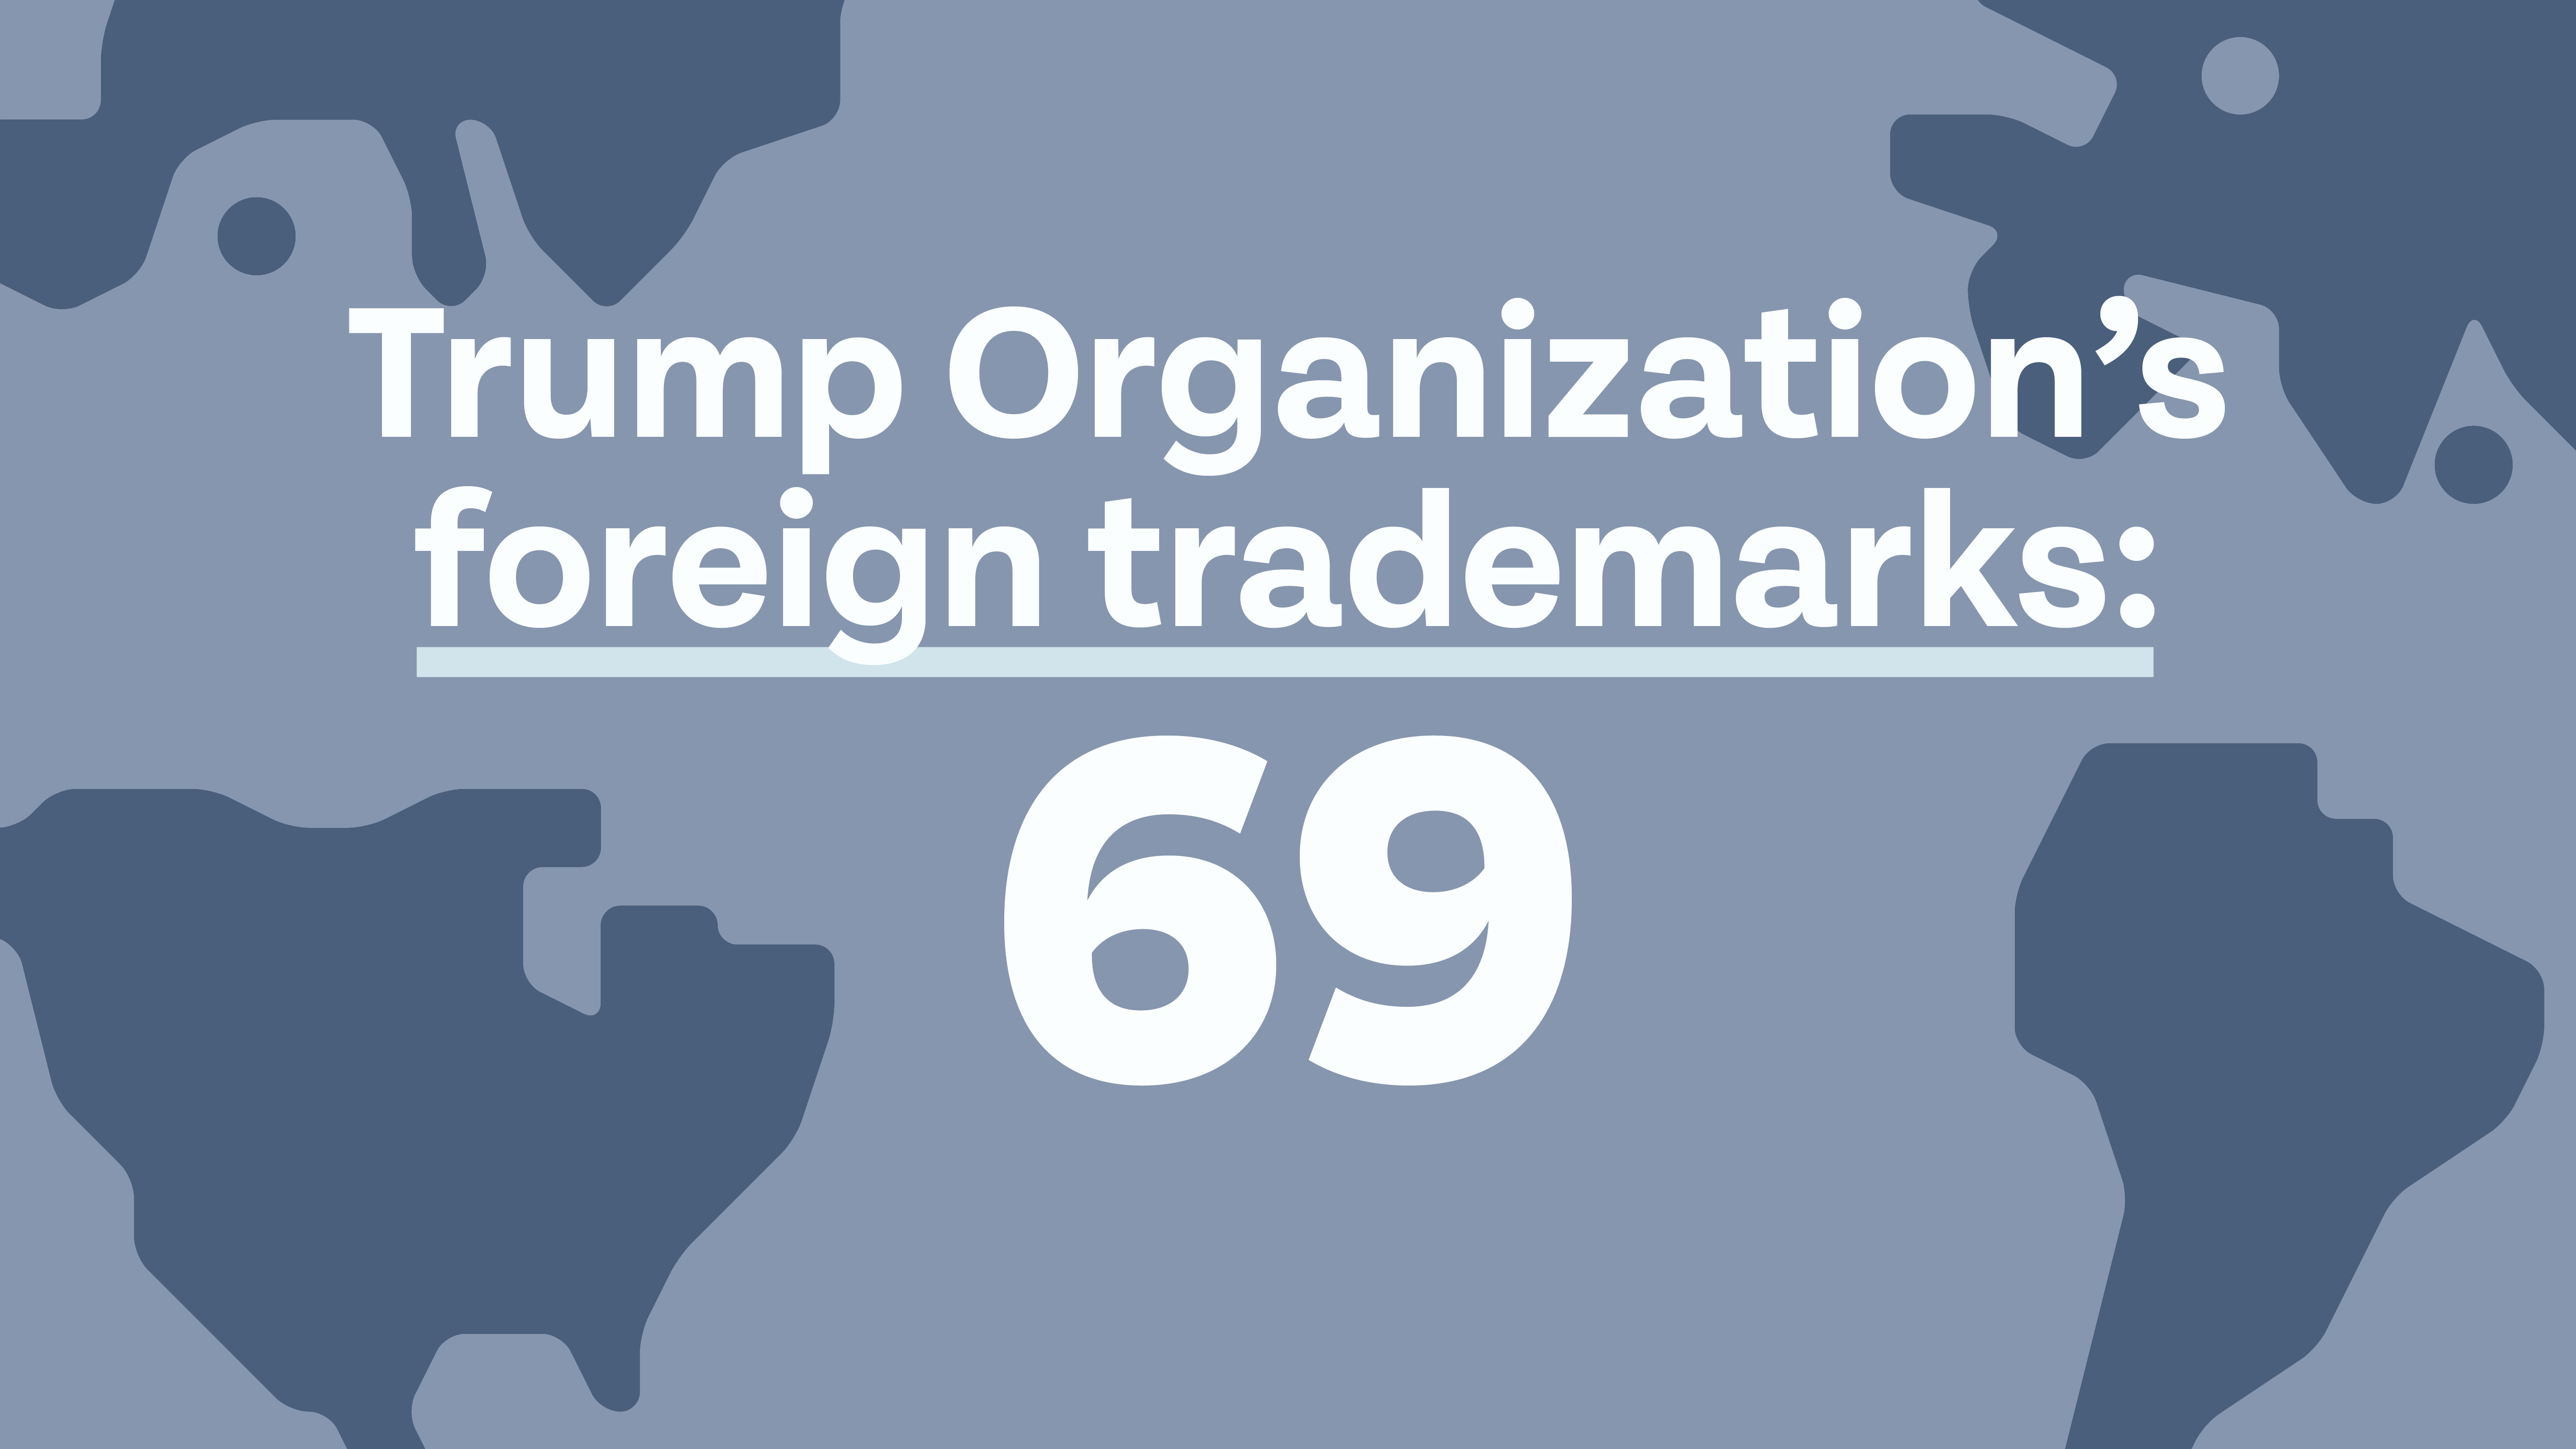 Title: "Trump Organization's foreign trademarks: 60". Grey silhouette of North America, South America, Asia and Europe" on borders of image.